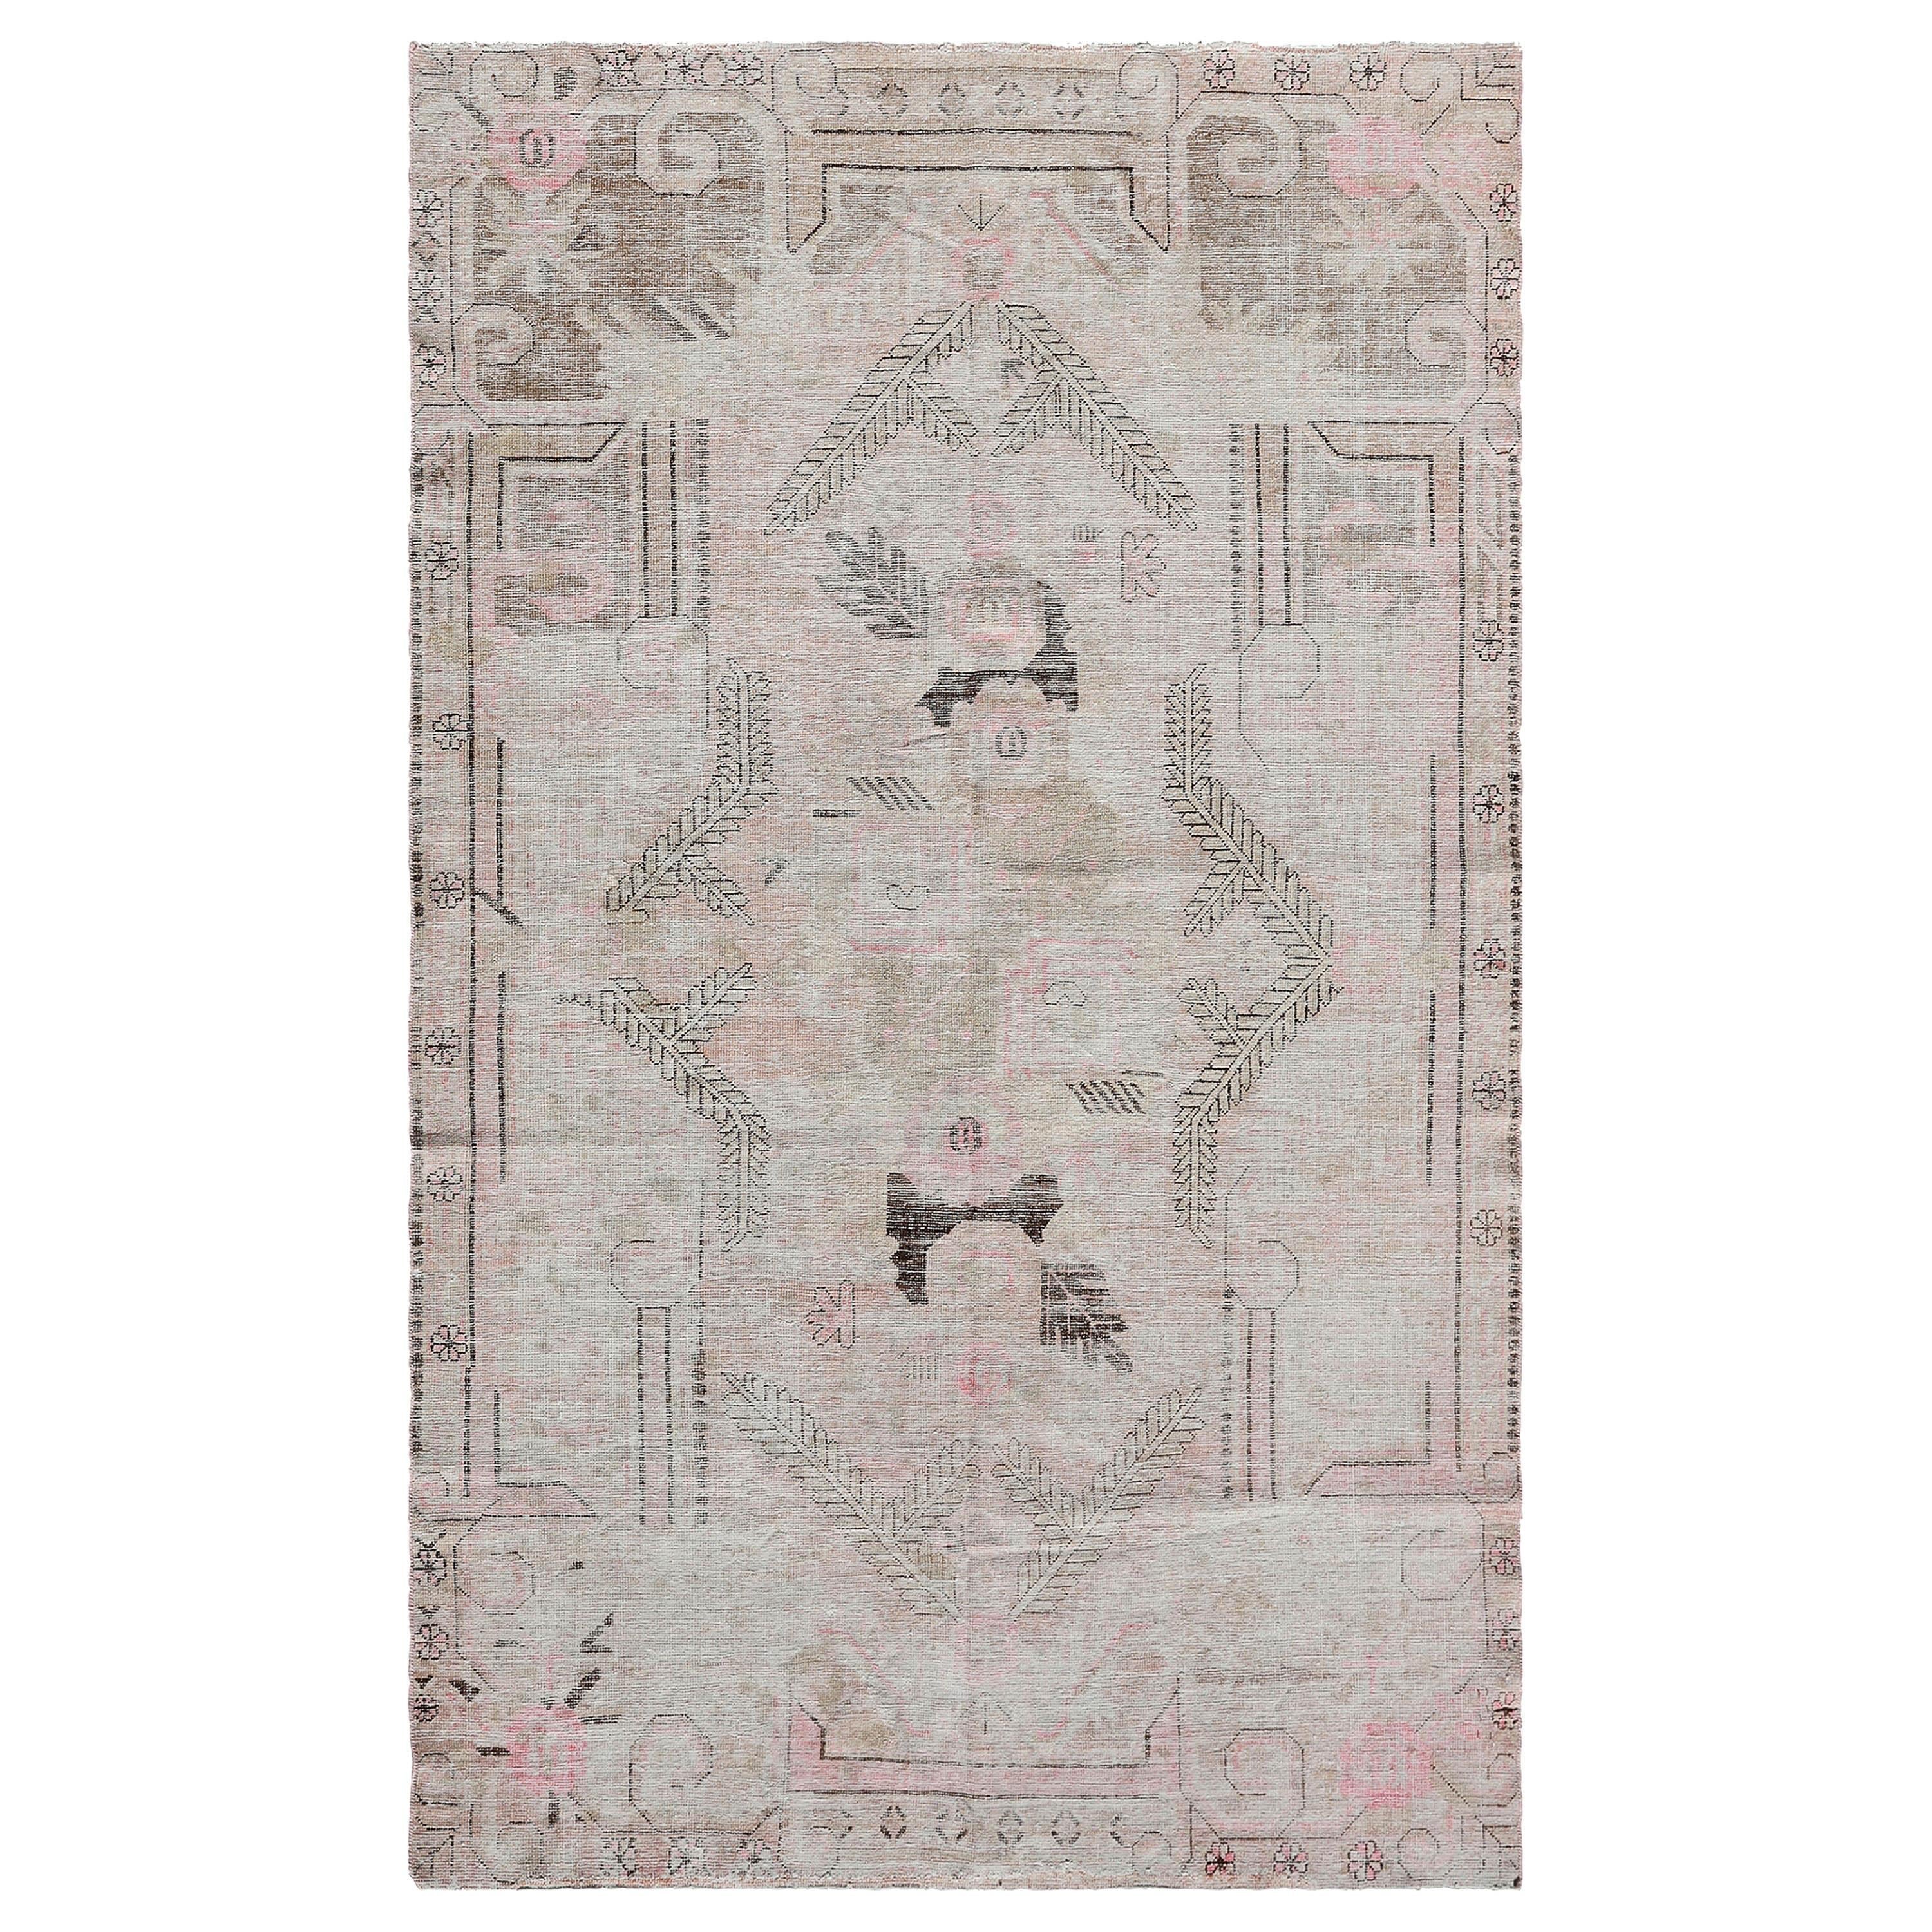 abc carpet Beige and Pink Vintage Wool Cotton Blend Rug - 5'5" x 9'1" For Sale